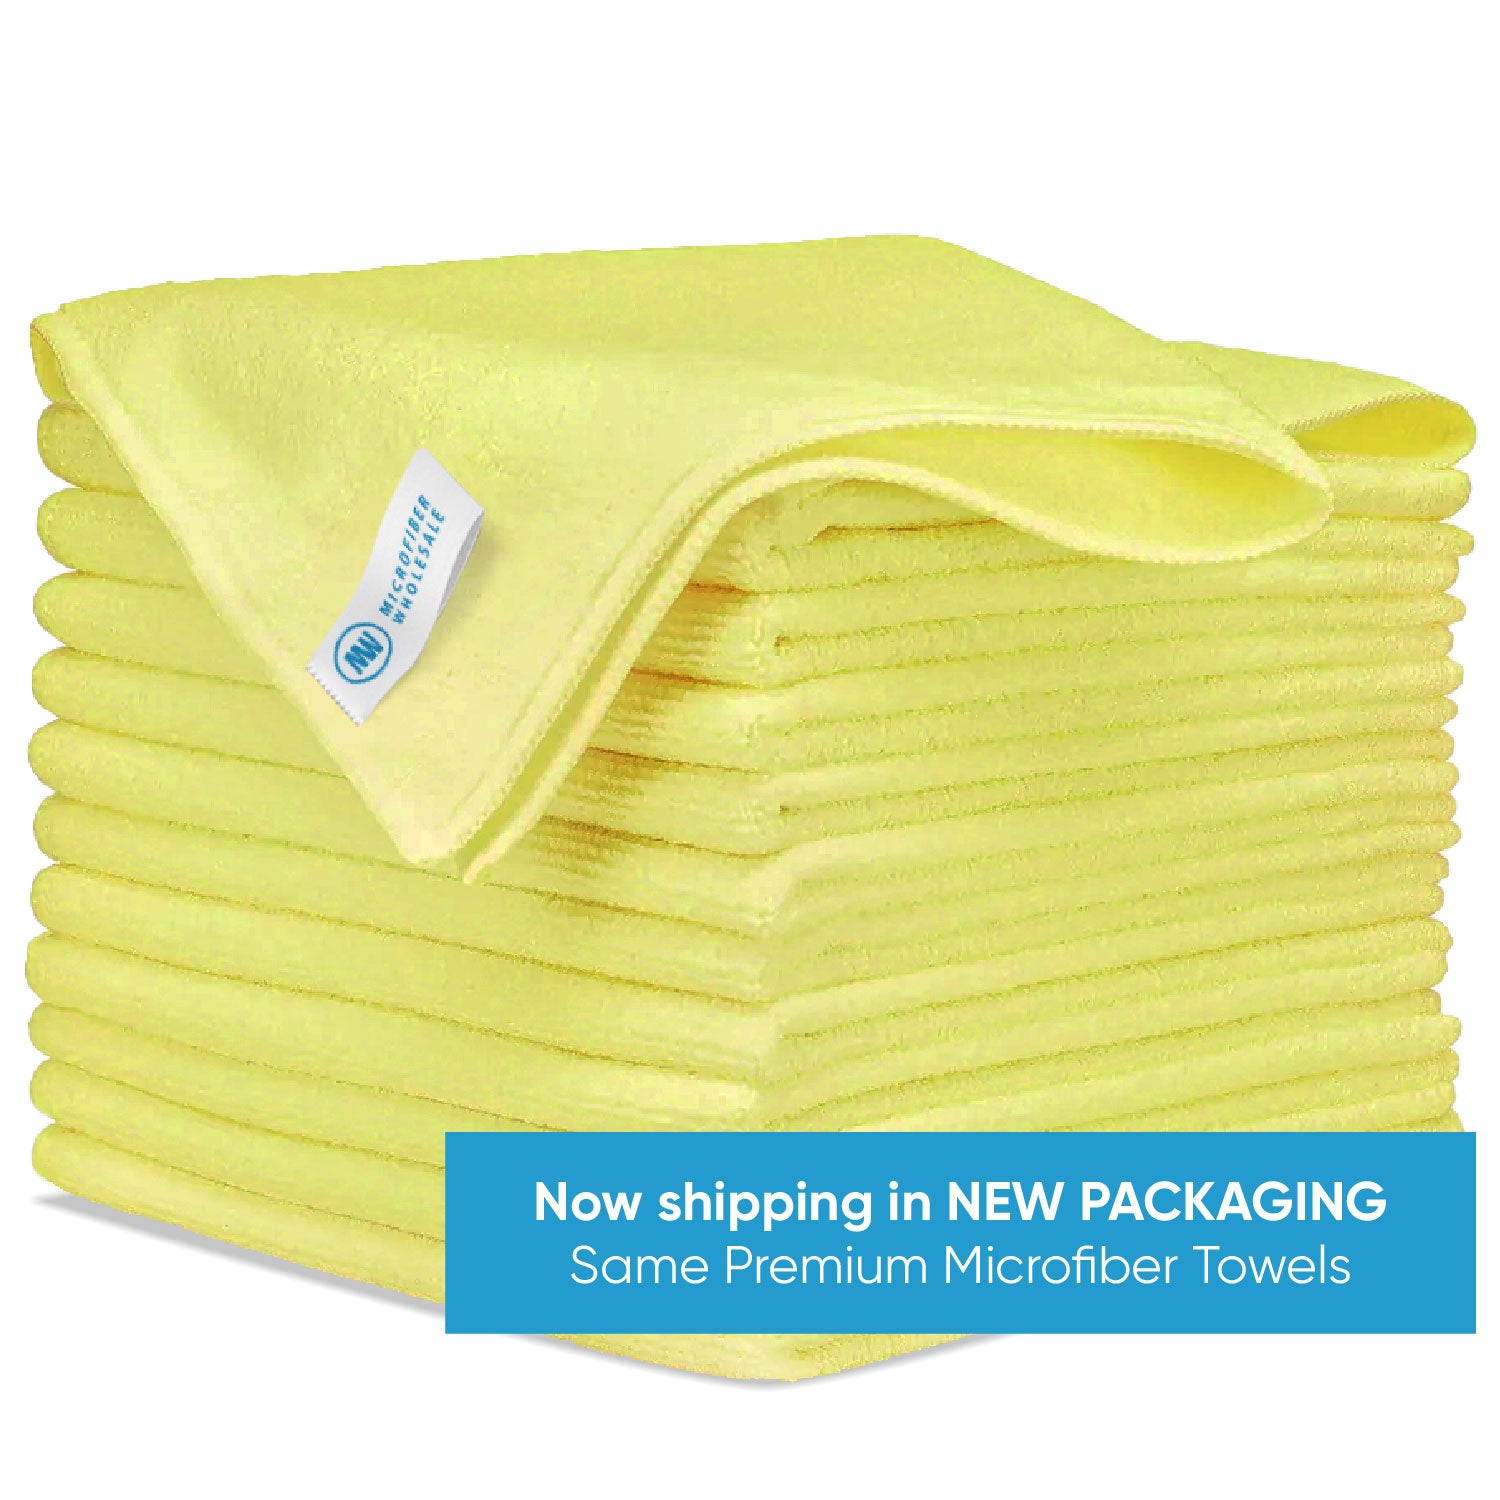 Pineapple Mesh Microfiber Towels with Different Colors and Sizes